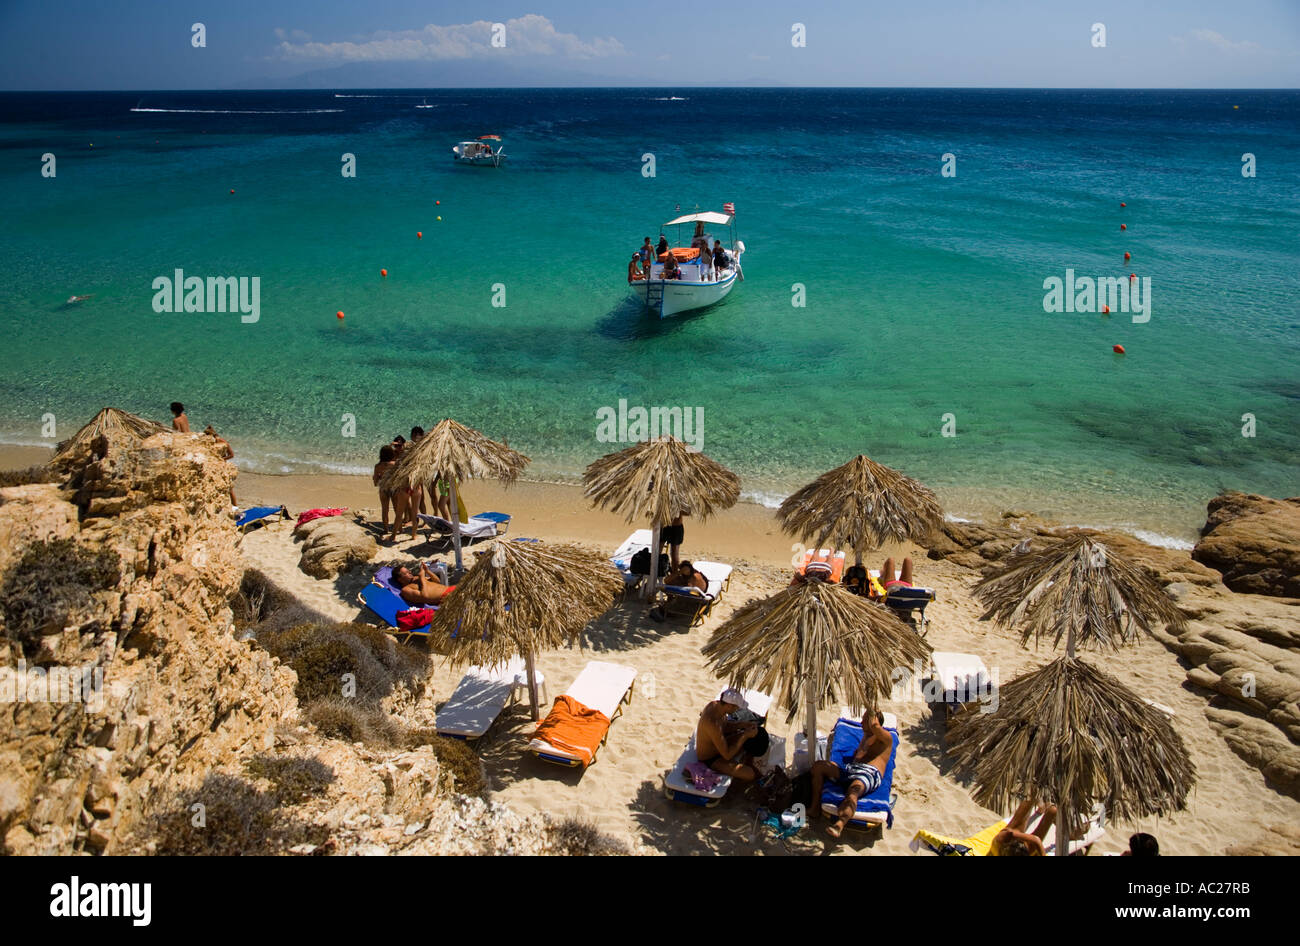 Boat with tourists arriving at bank of the Elia Beach Elia Mykonos Greece Stock Photo